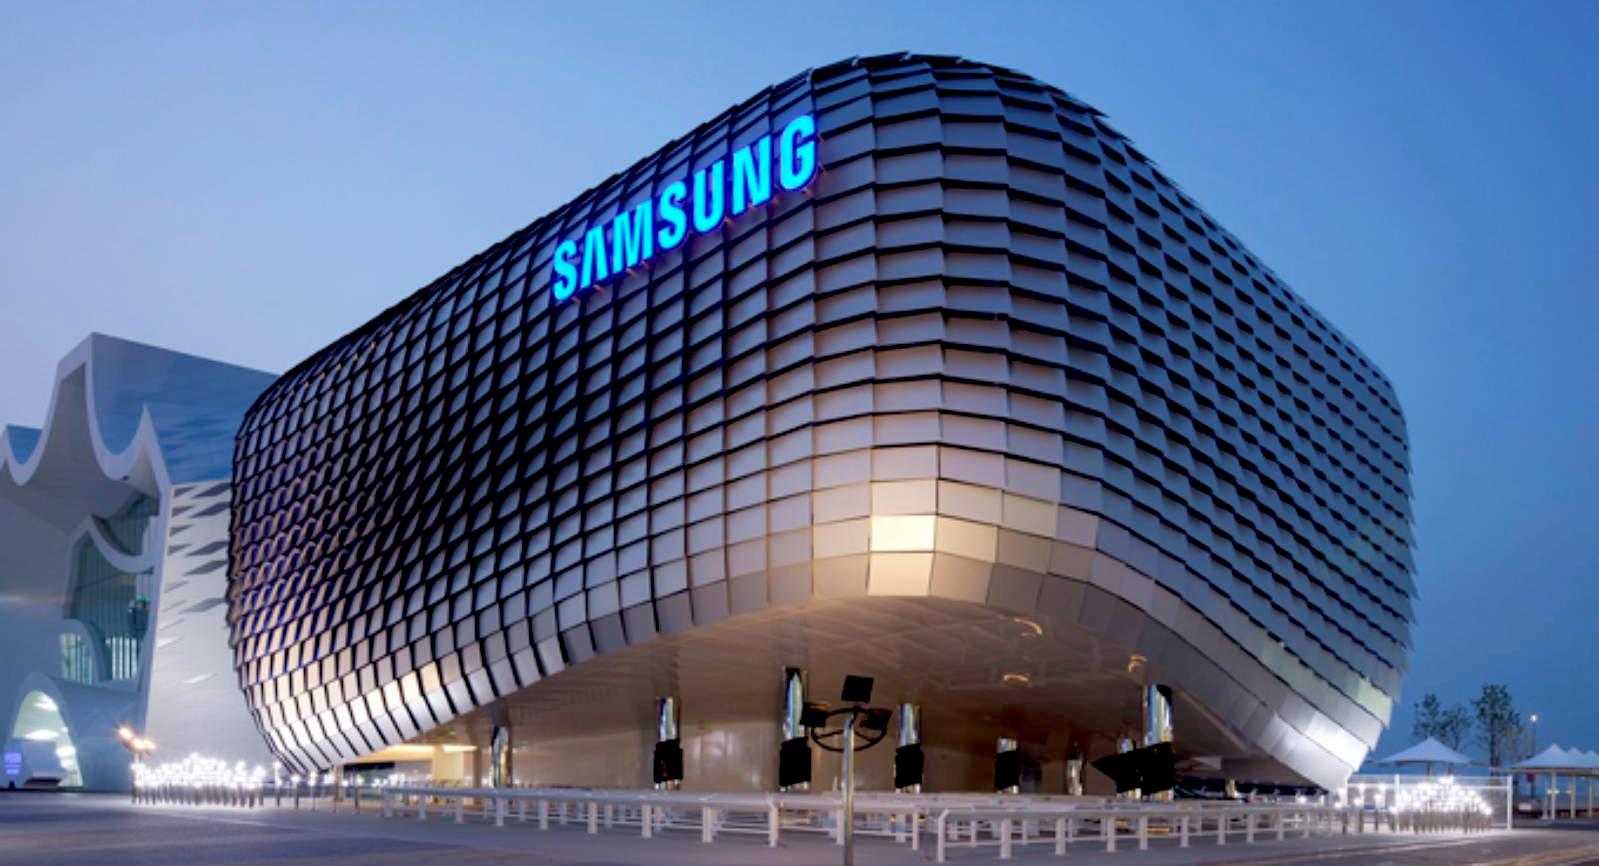 Samsung the 7th most valuable brand, according to Forbes